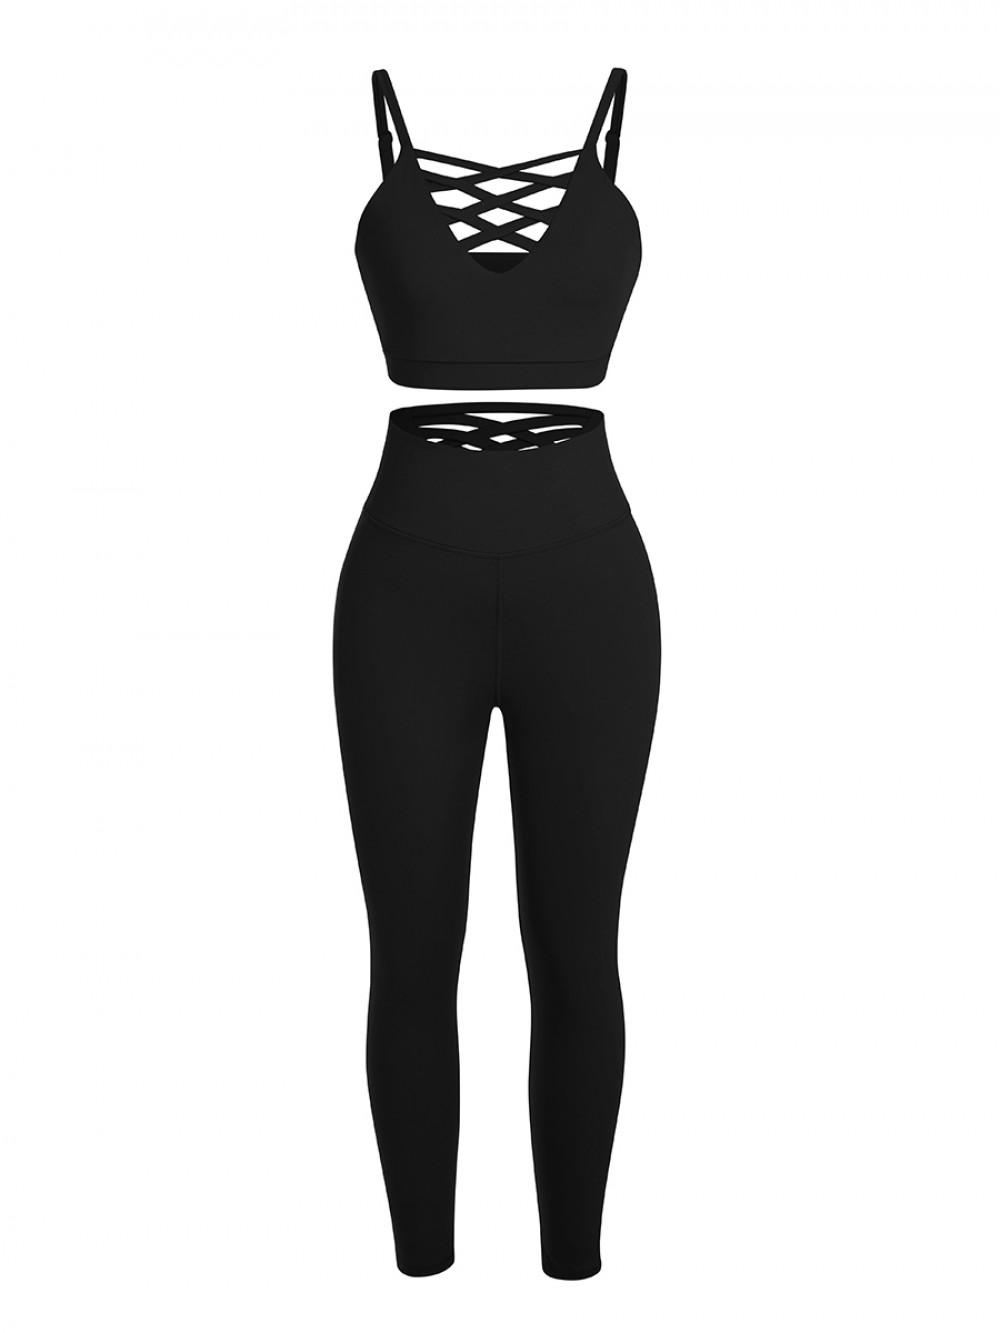 Black Adjustable Straps High Waist Athletic Suit For Hanging Out